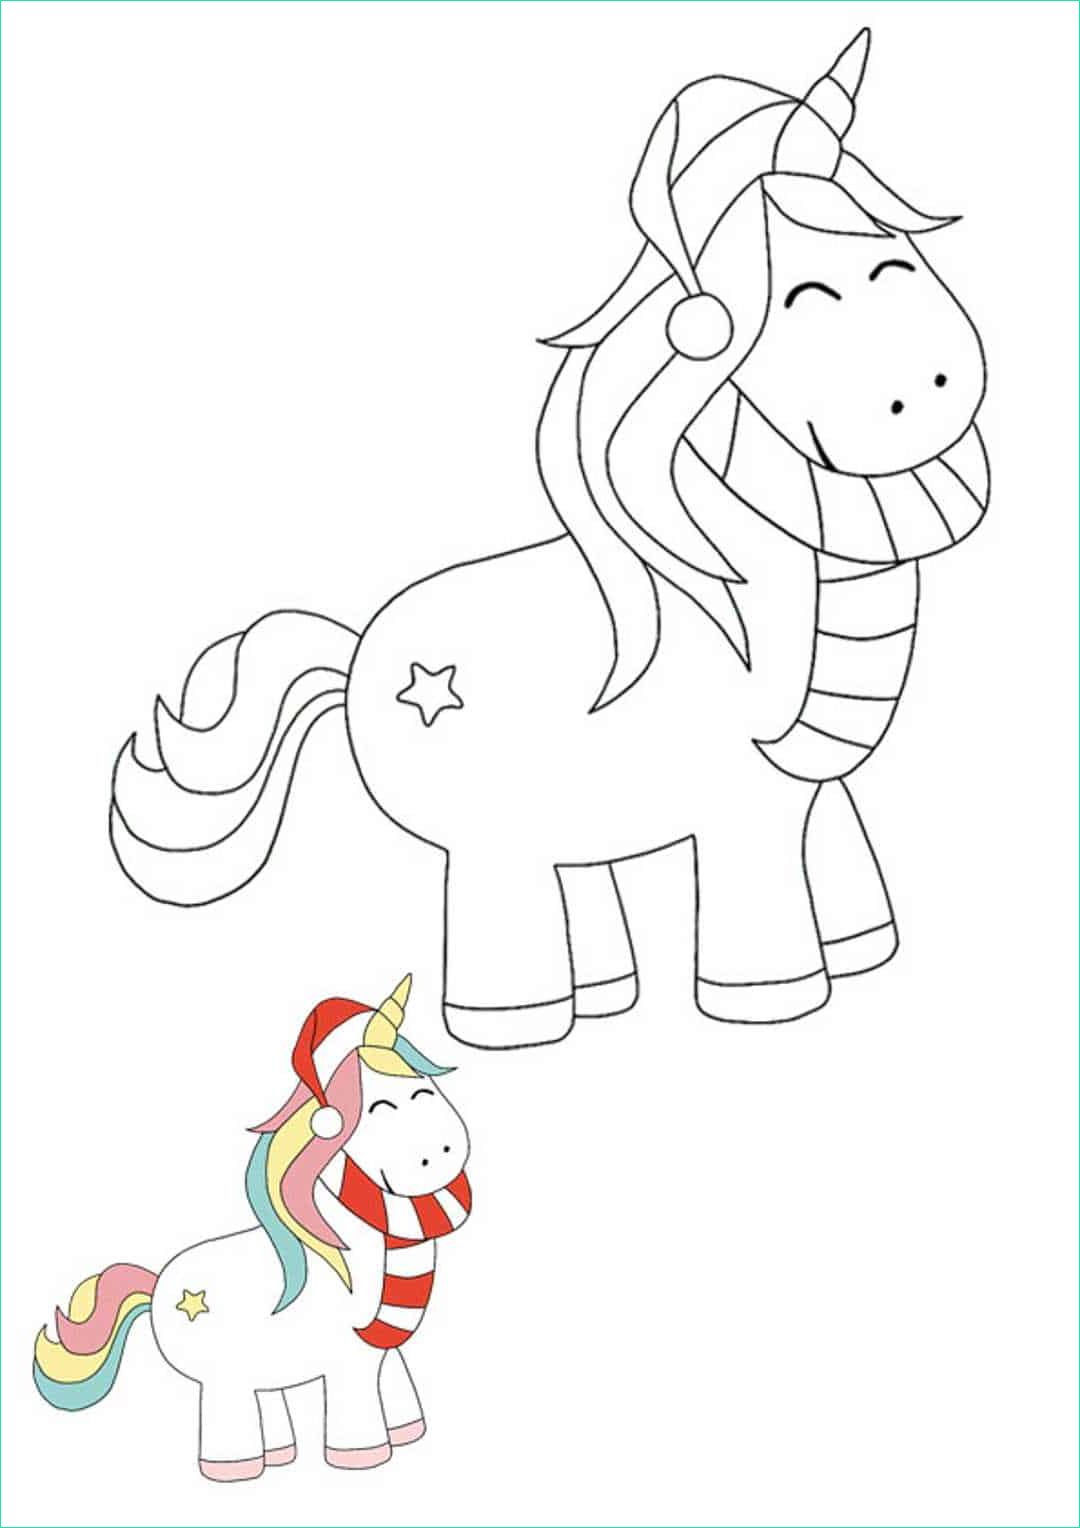 Coloriage Licorne Noel Luxe Images Coloriage Licorne Noel La Team tonton Les Coloriages